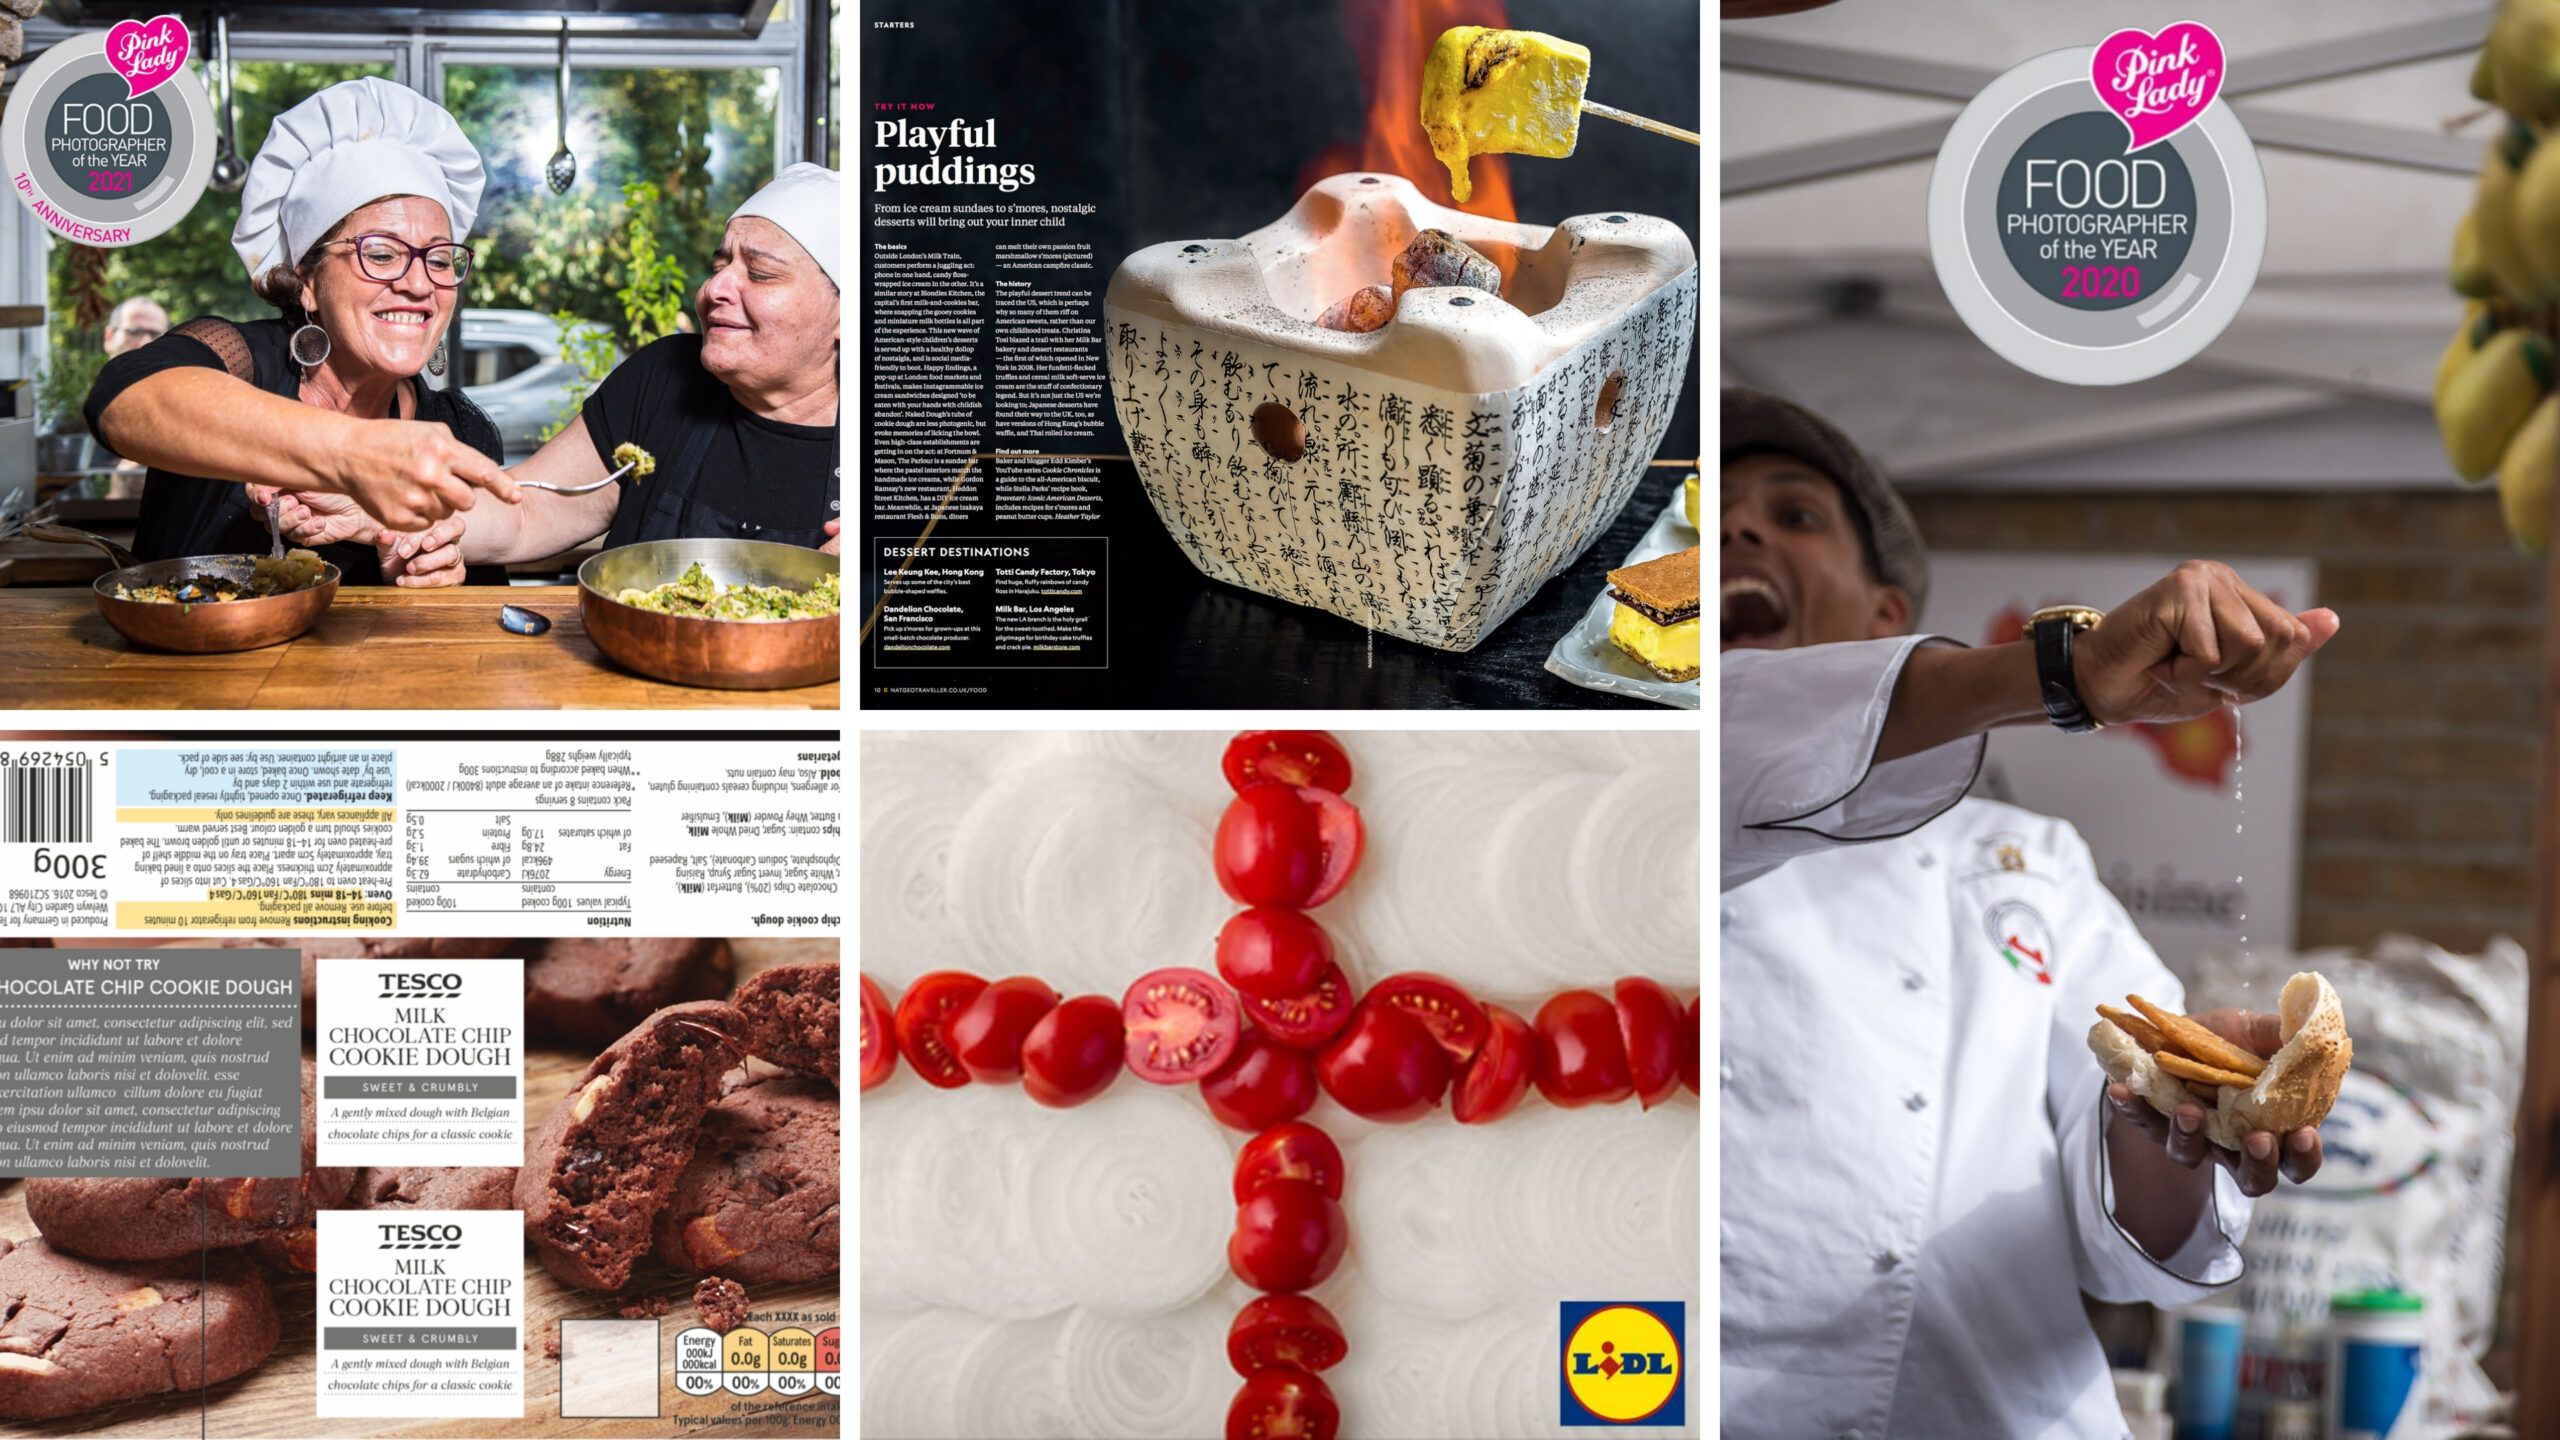 Food Photo Circle worked together with National Geographics, Lidl, tesco, Pink Lady Food Photographer of the year!